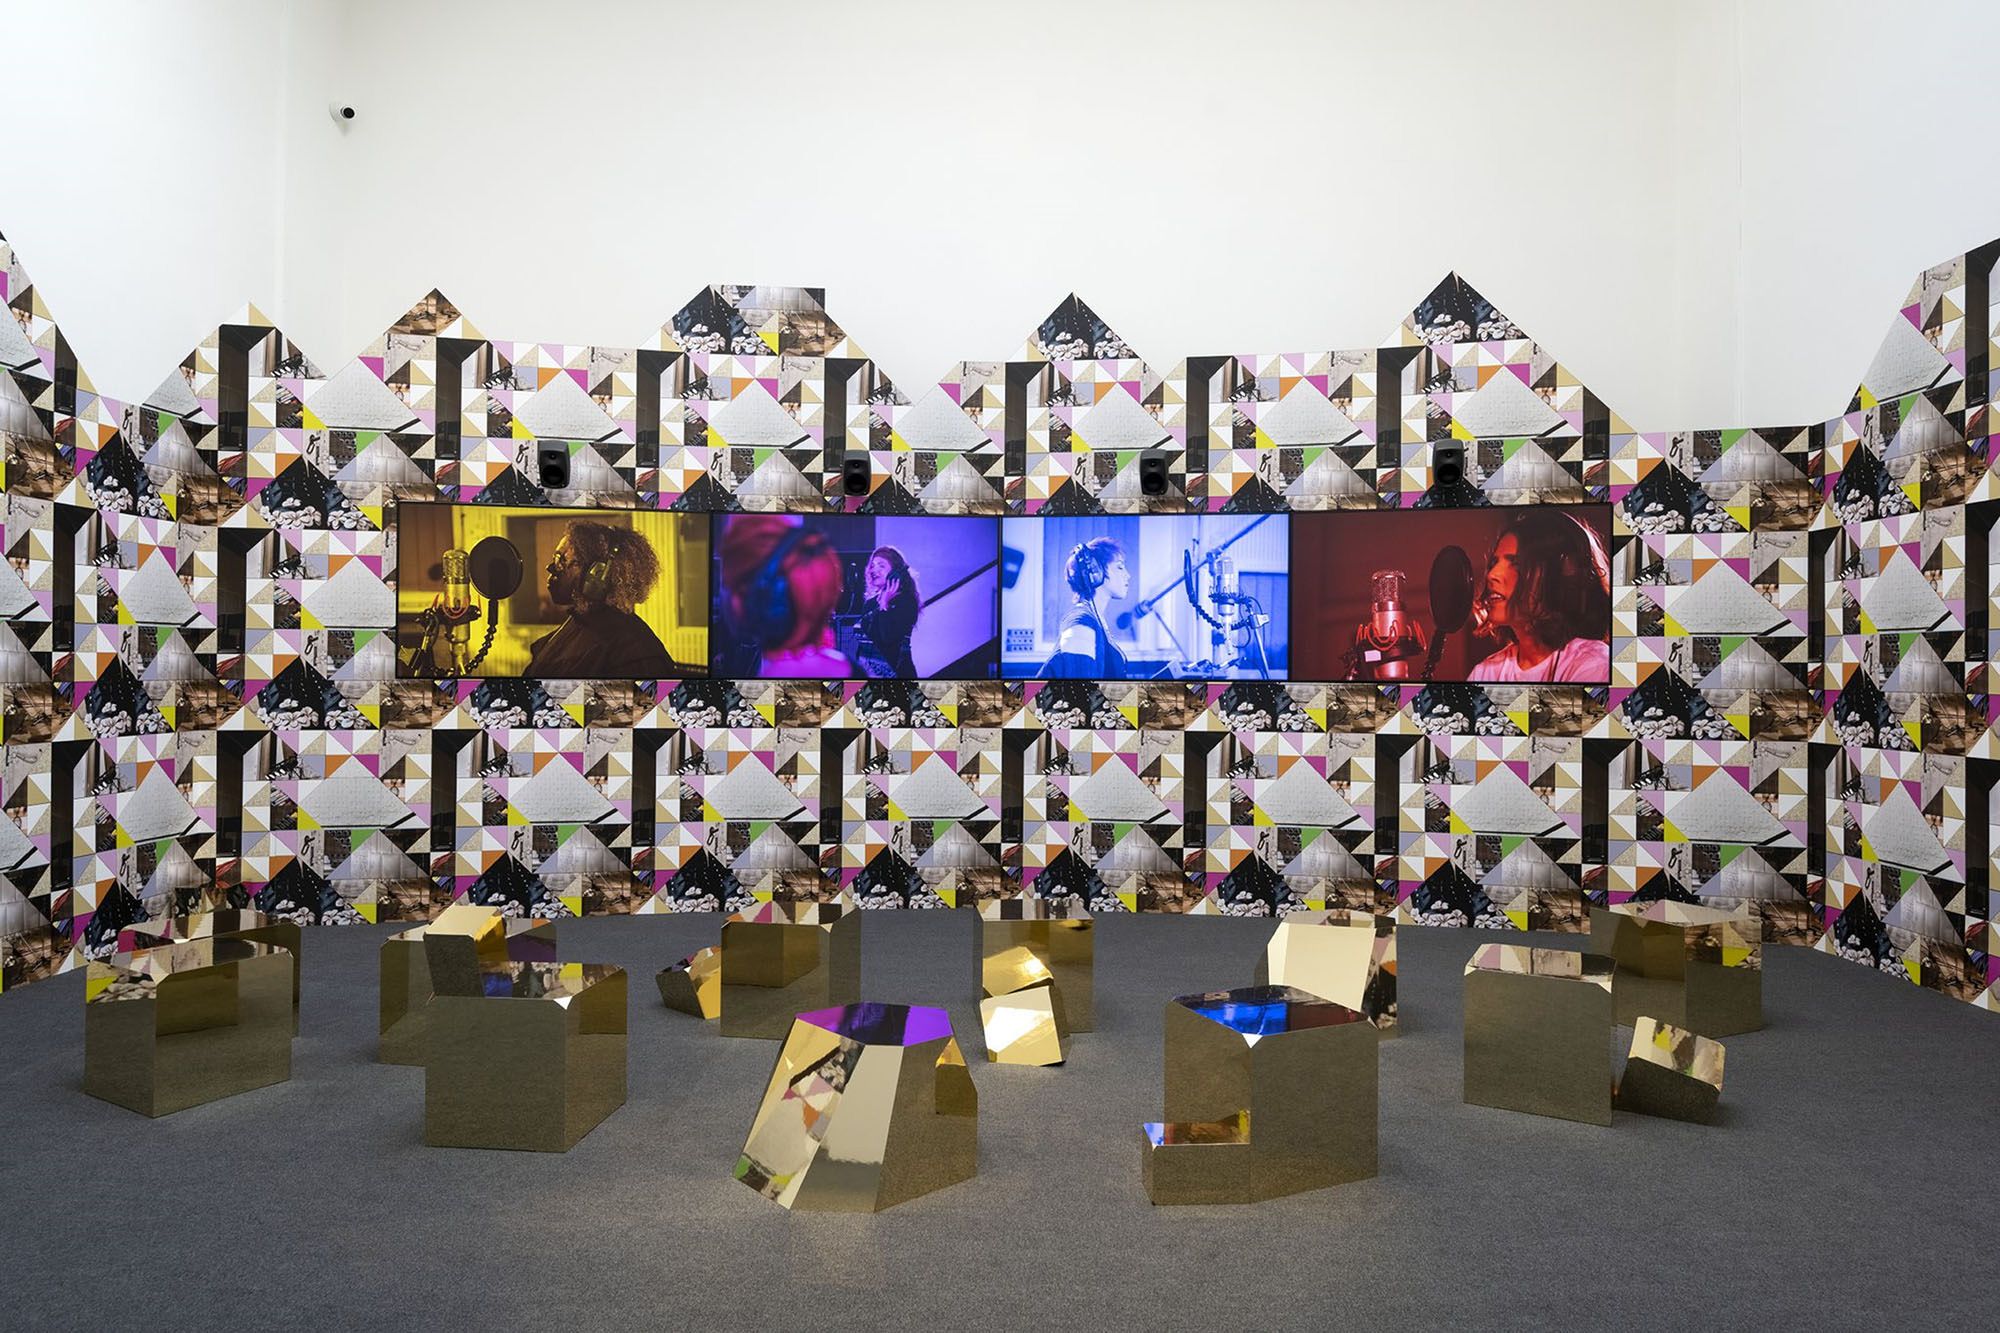 Image shows a digital render of Sonia Boyce's Venice Biennale exhibition, Feeling Her Way. The image shows angular gold blocks sitting on the ground. In the background are several screens with images of people singing and performing music. The screens sit on a multi-coloured triangular wall. 